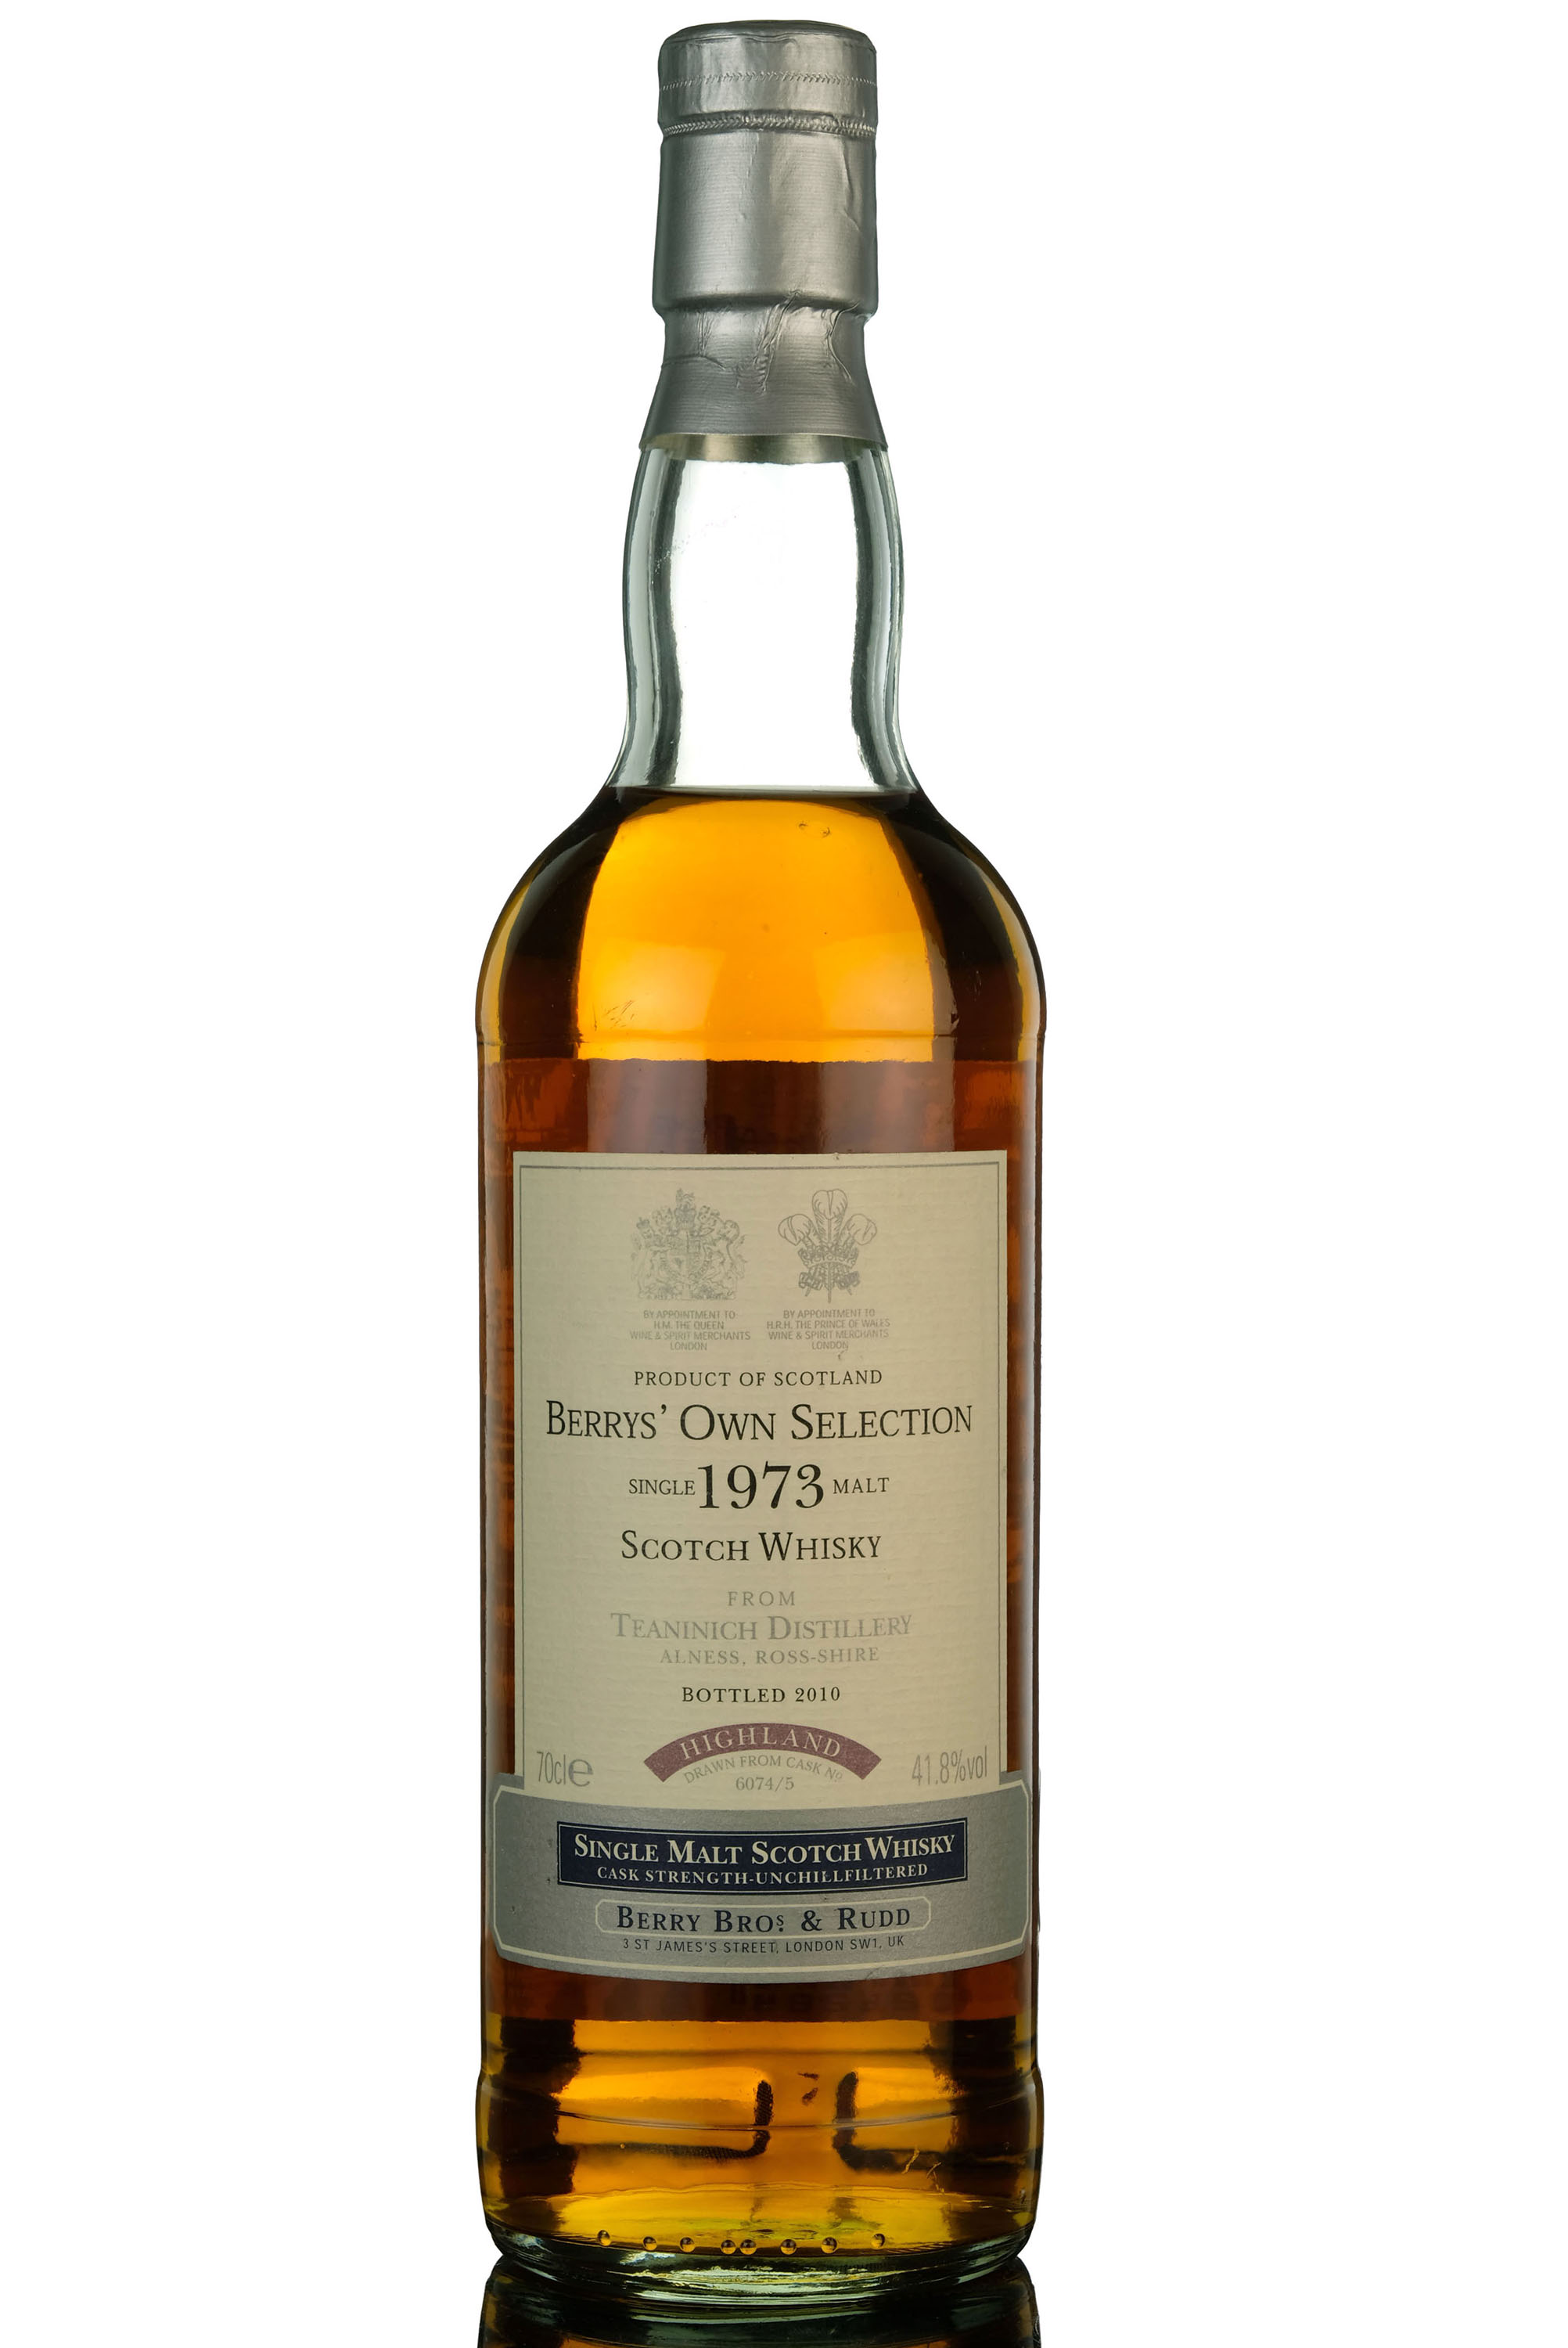 Teaninich 1973-2010 - Berry Bros & Rudd - Berrys Own Selection - Cask 6074/5